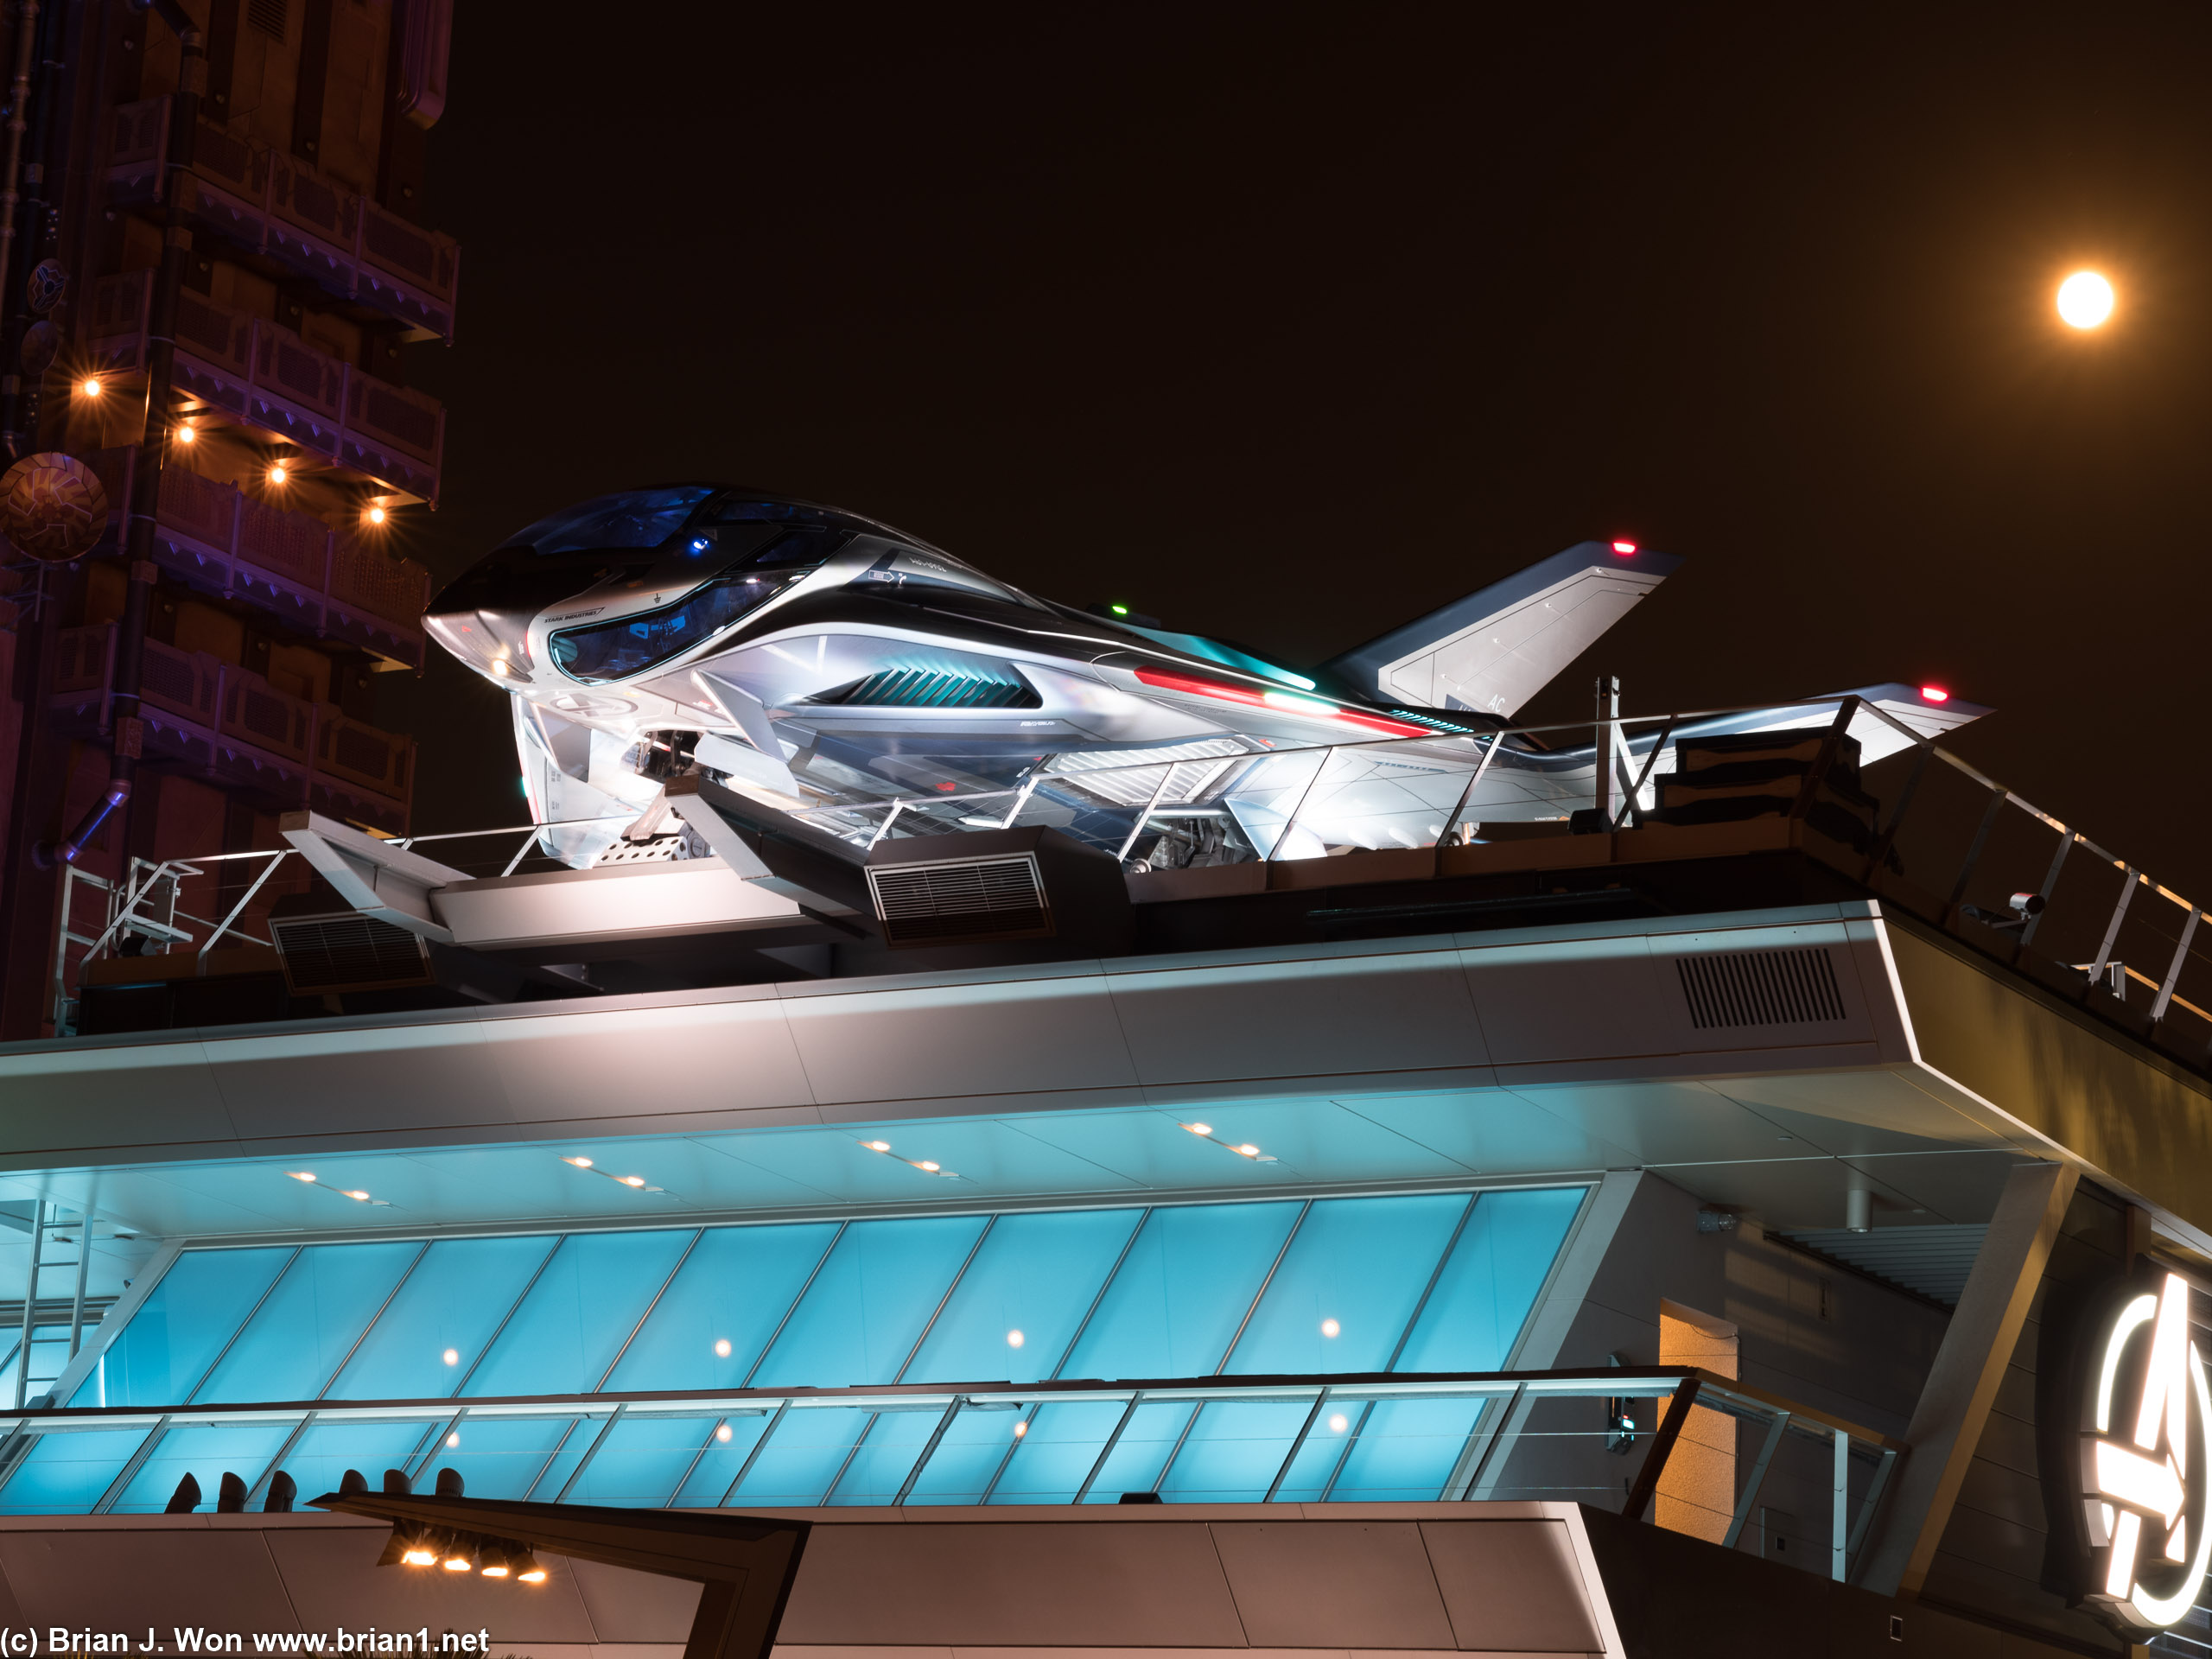 The Quinjet and the moon.